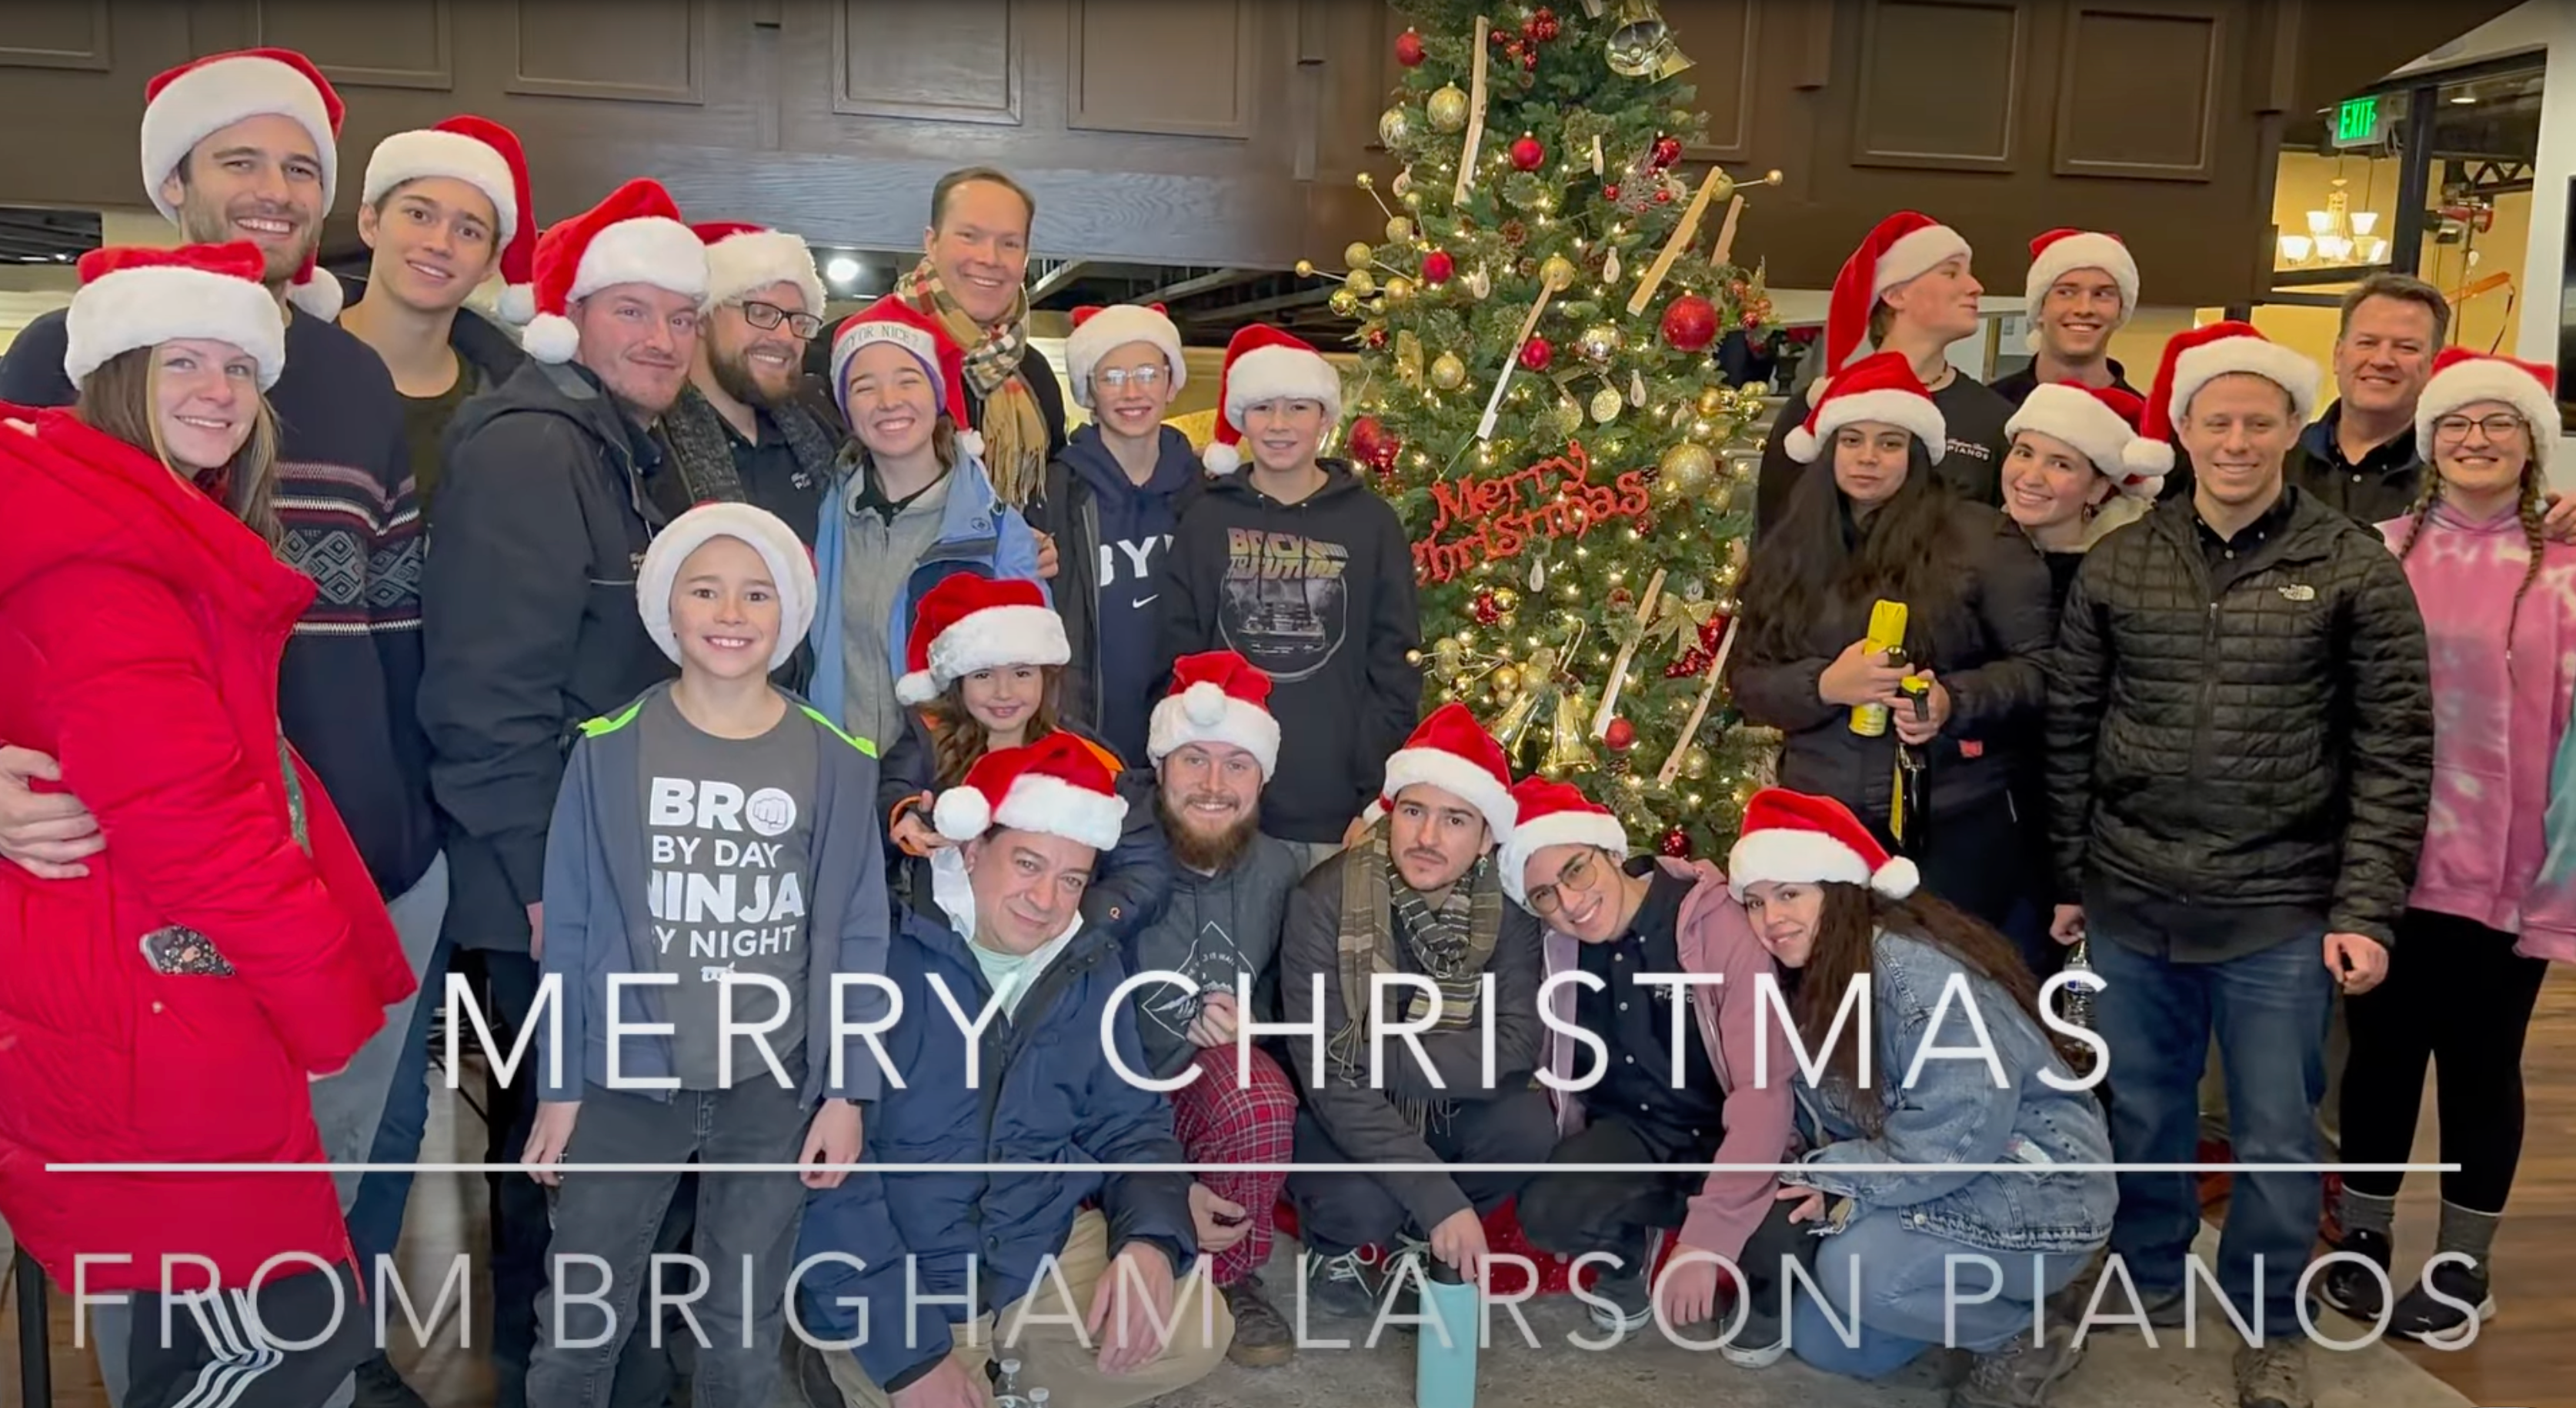 Load video: The piano restoration team at Brigham Larson Pianos ready for Christmas deliveries!